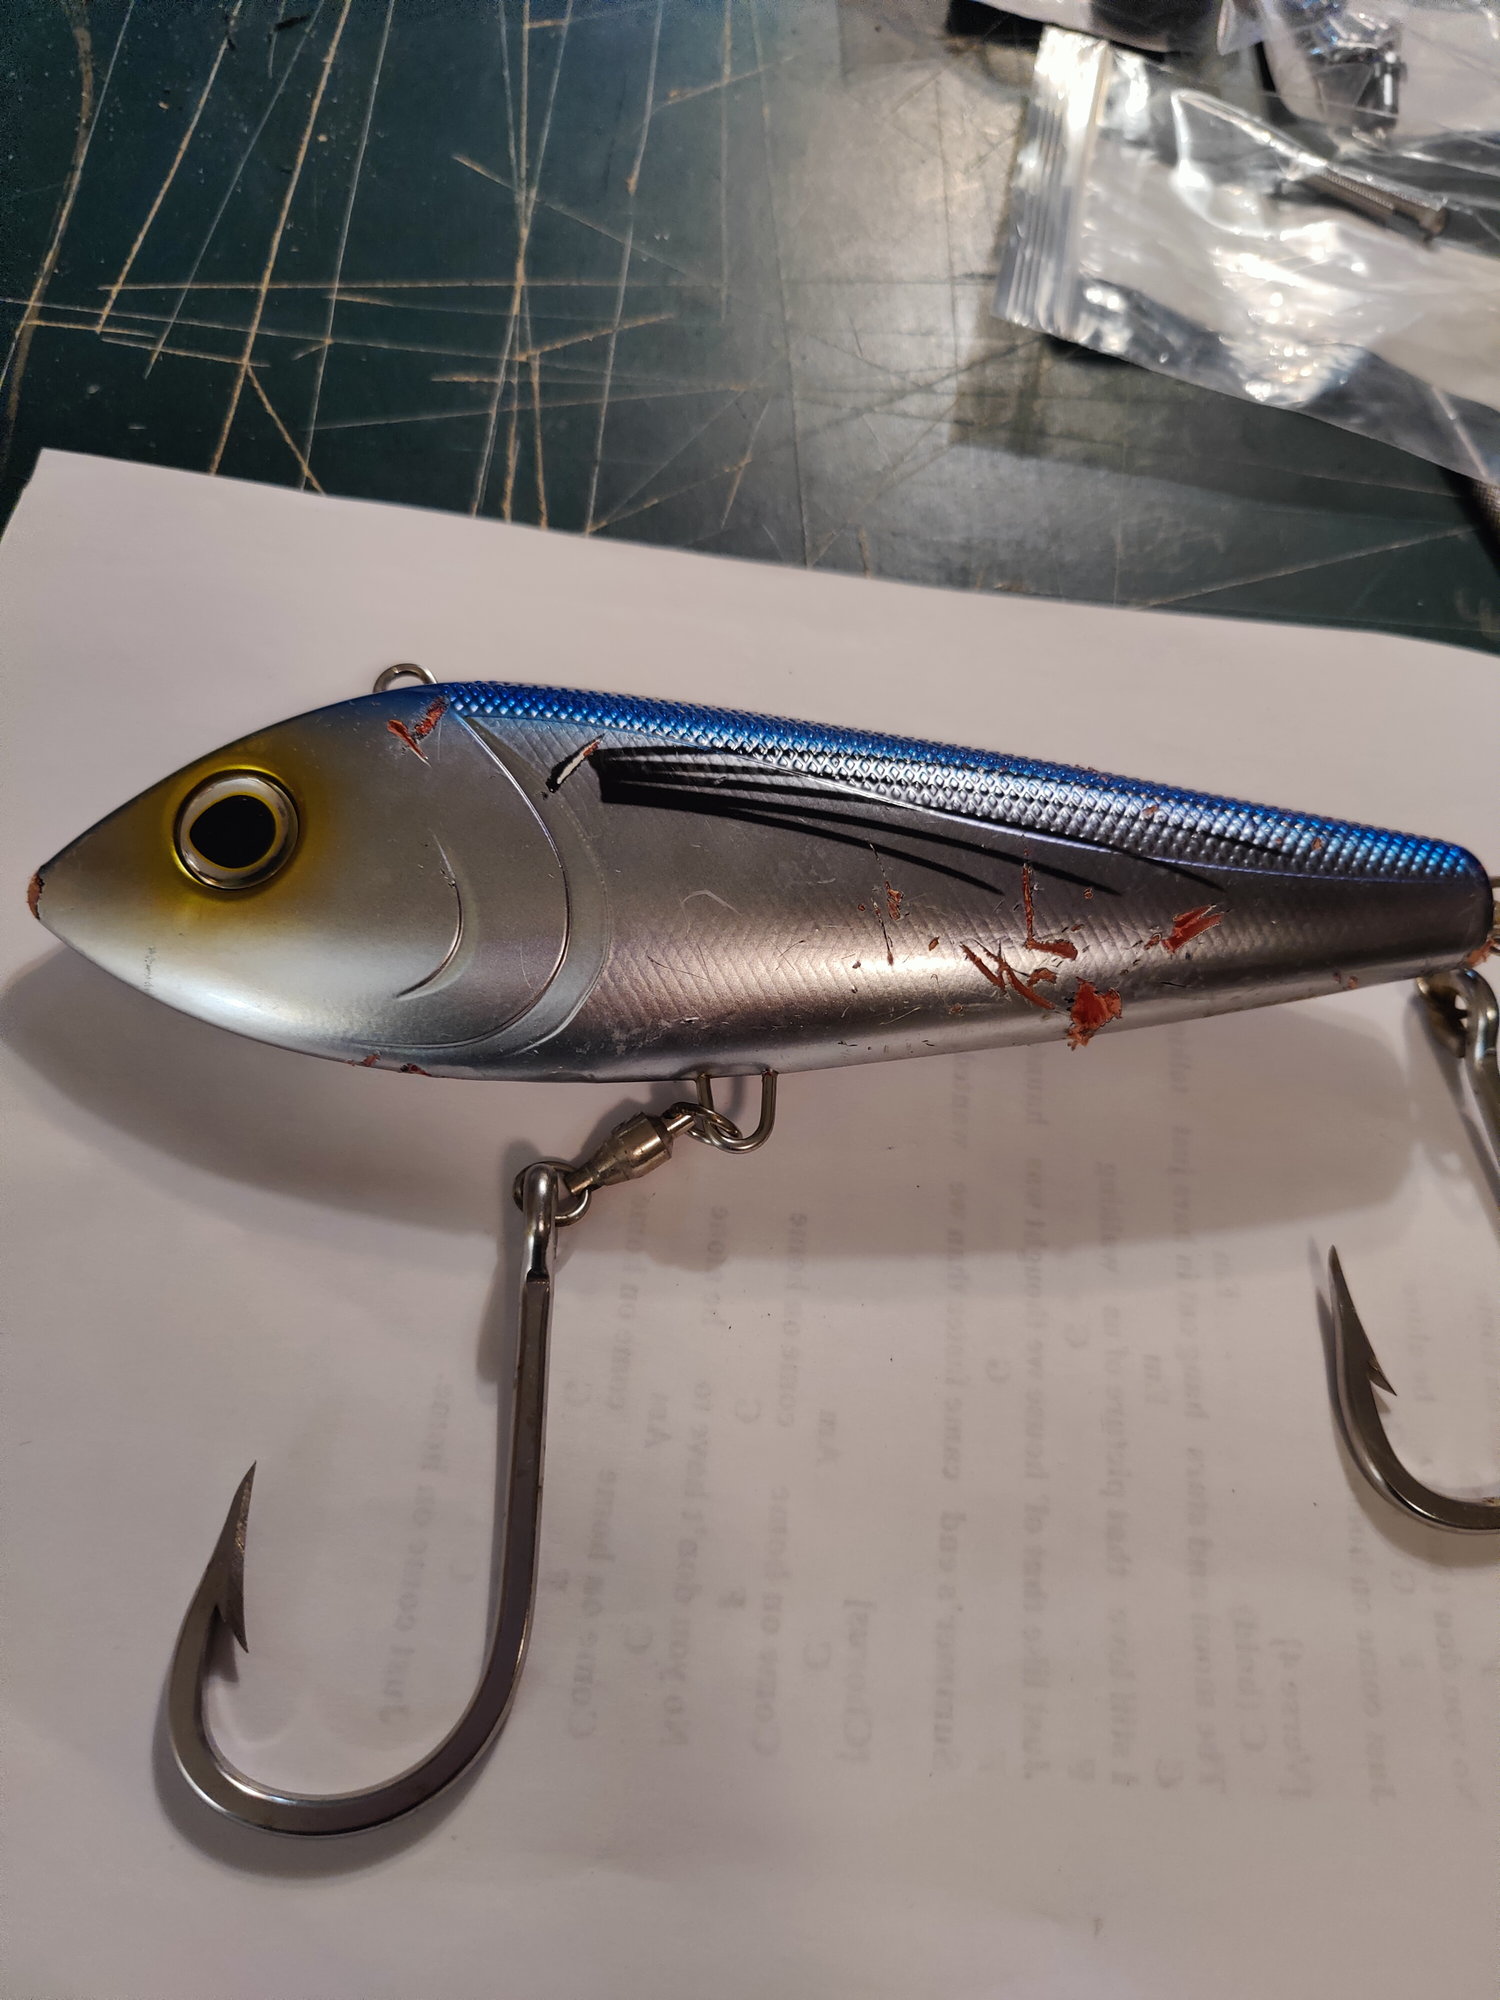 Trolling Lure Storage - Page 2 - The Hull Truth - Boating and Fishing Forum